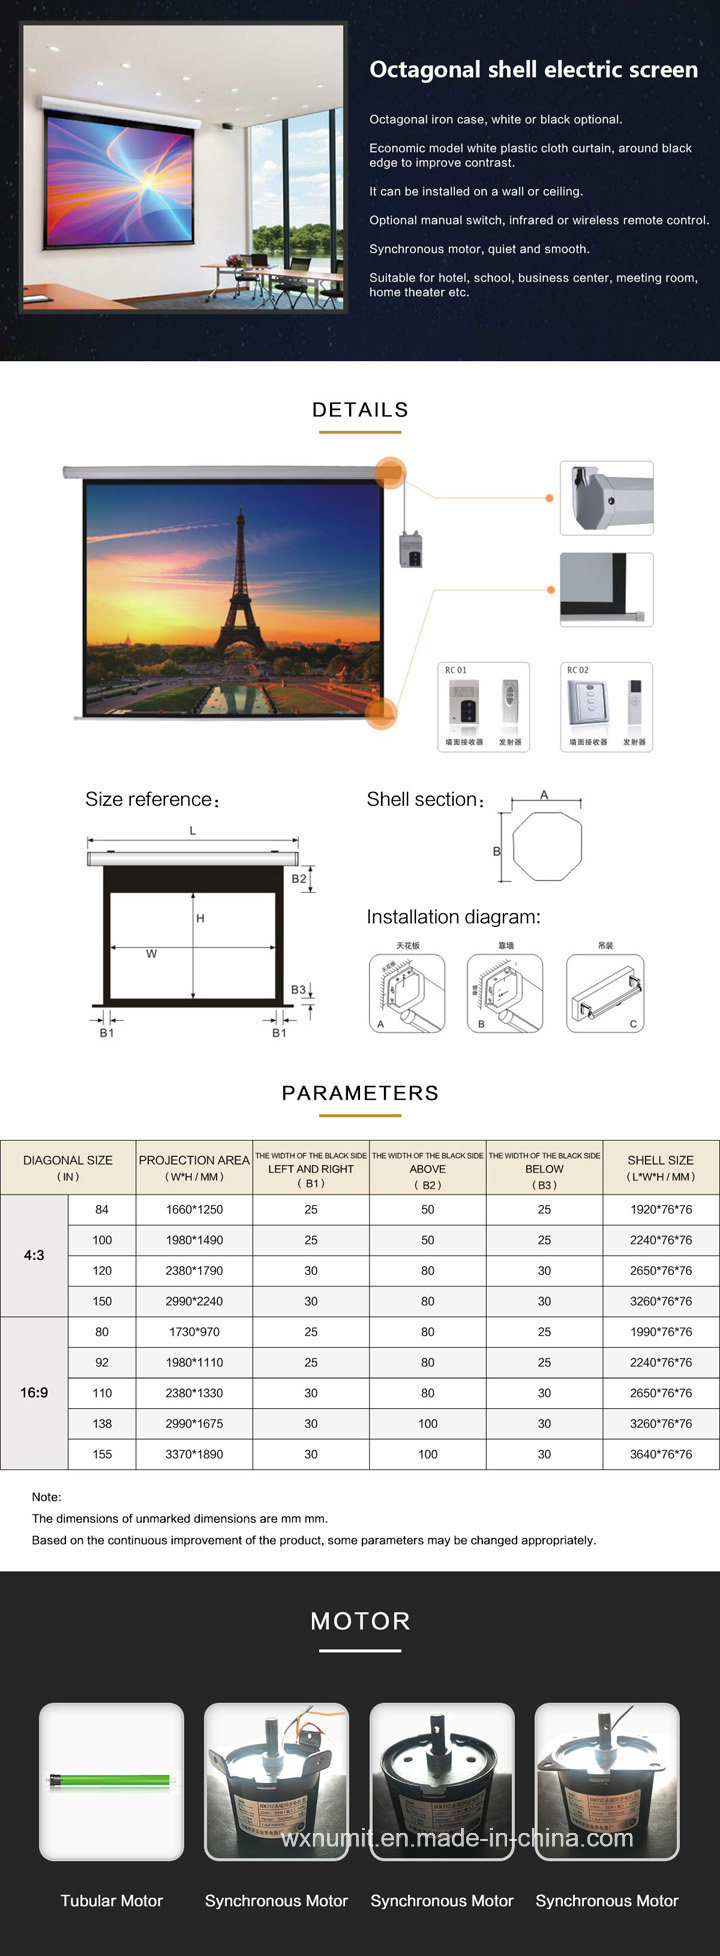 Wuxi Numit 100 Inch 4: 3 Motorized Projector Screen